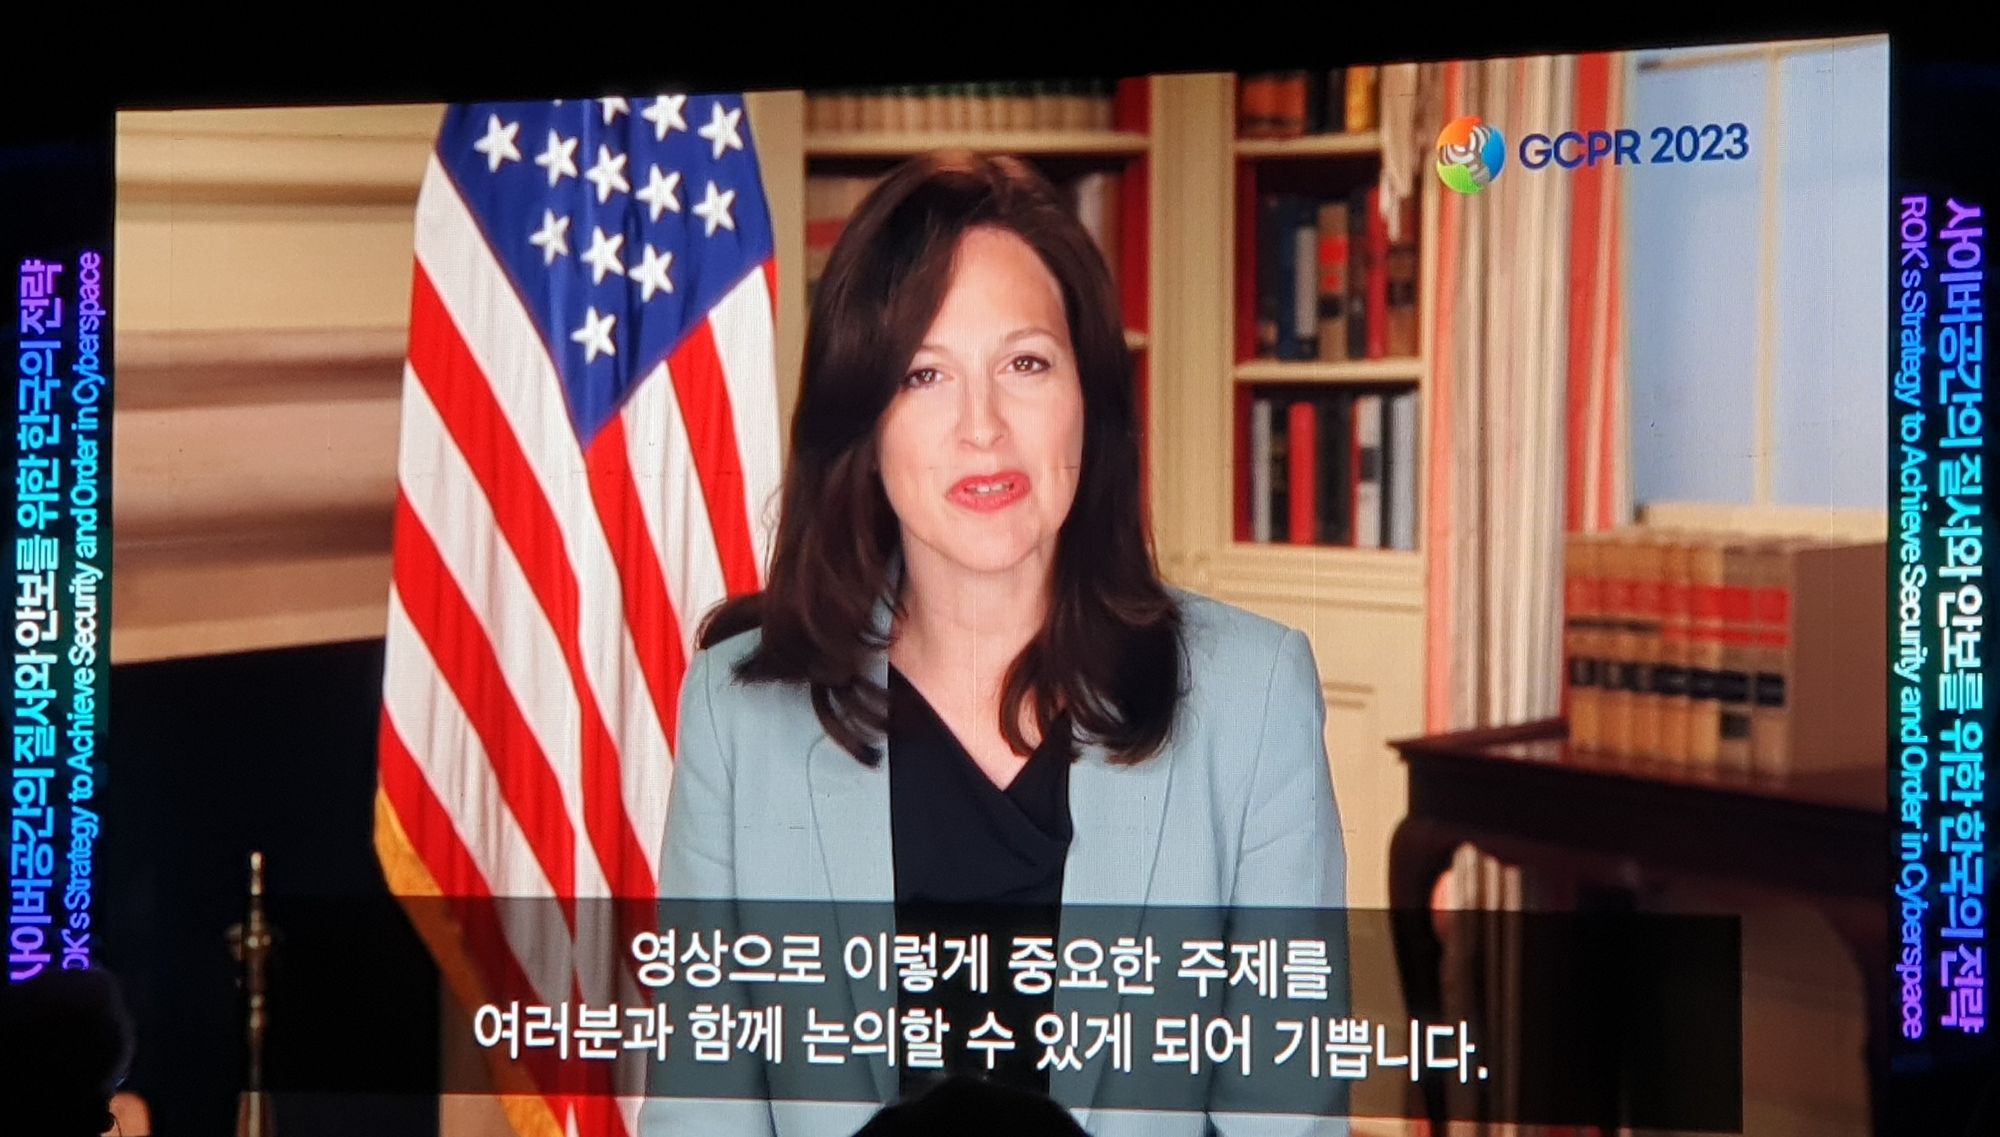 0912 - Top South Korean intelligence official stresses partnership in fighting cyber threats